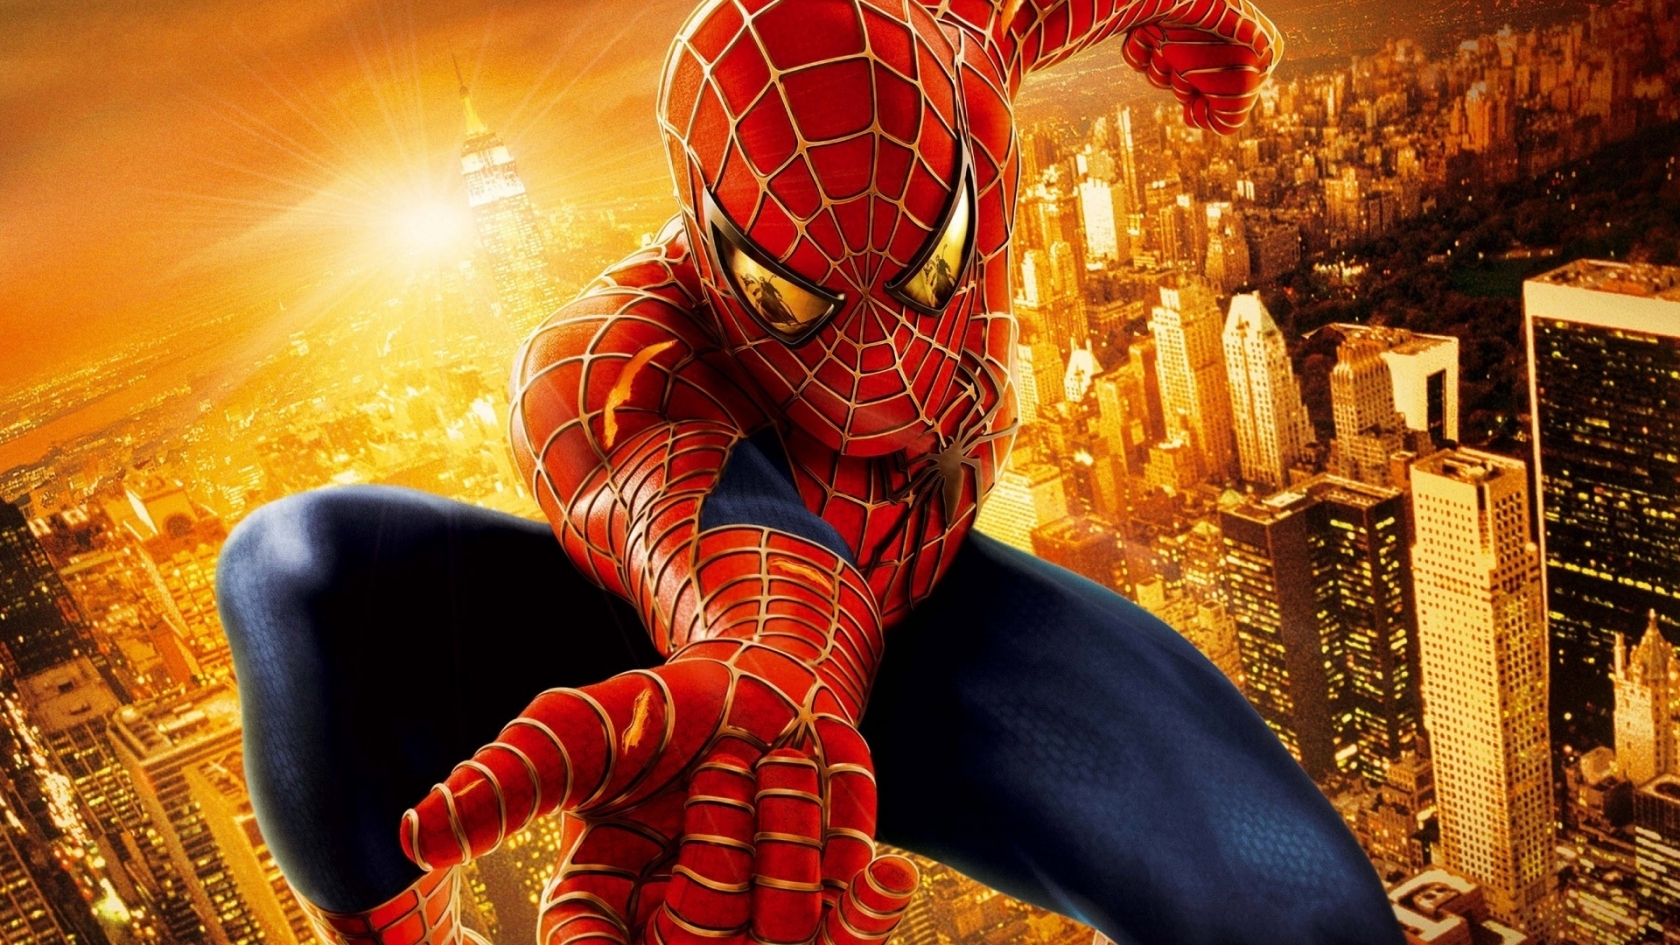 Spiderman Up for 1680 x 945 HDTV resolution